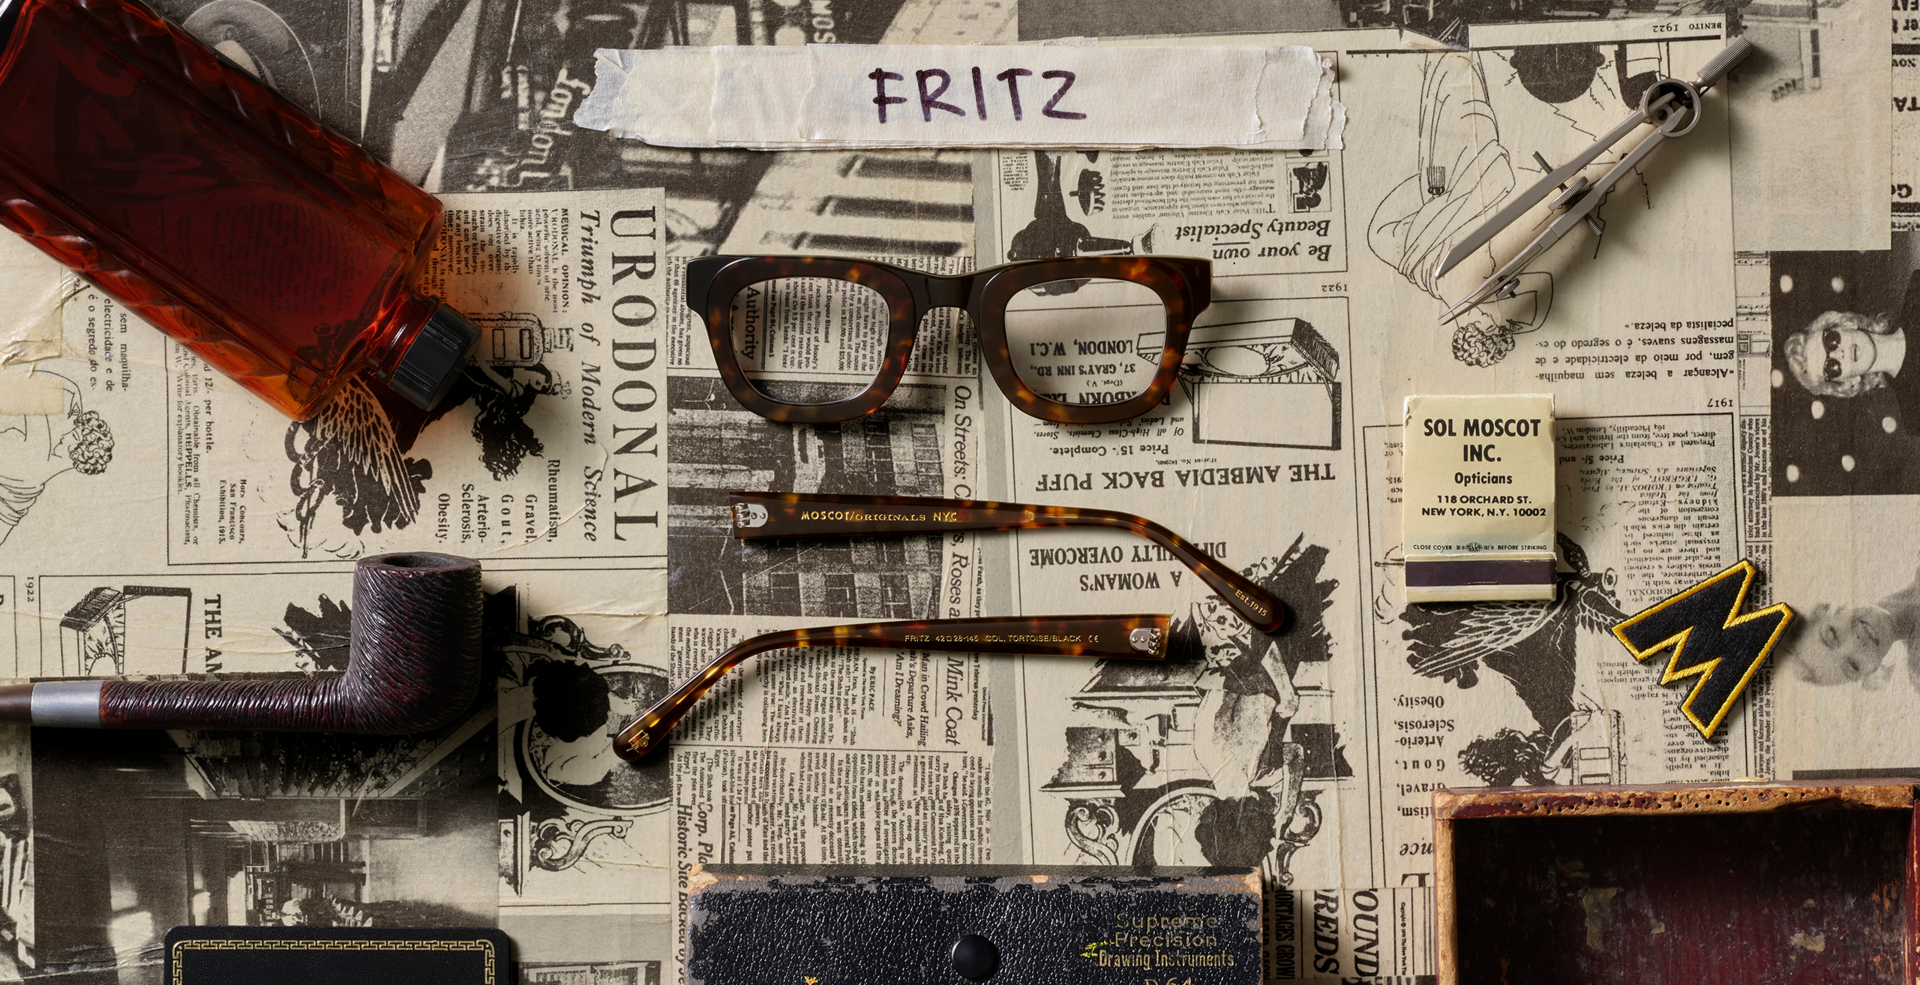 The FRITZ